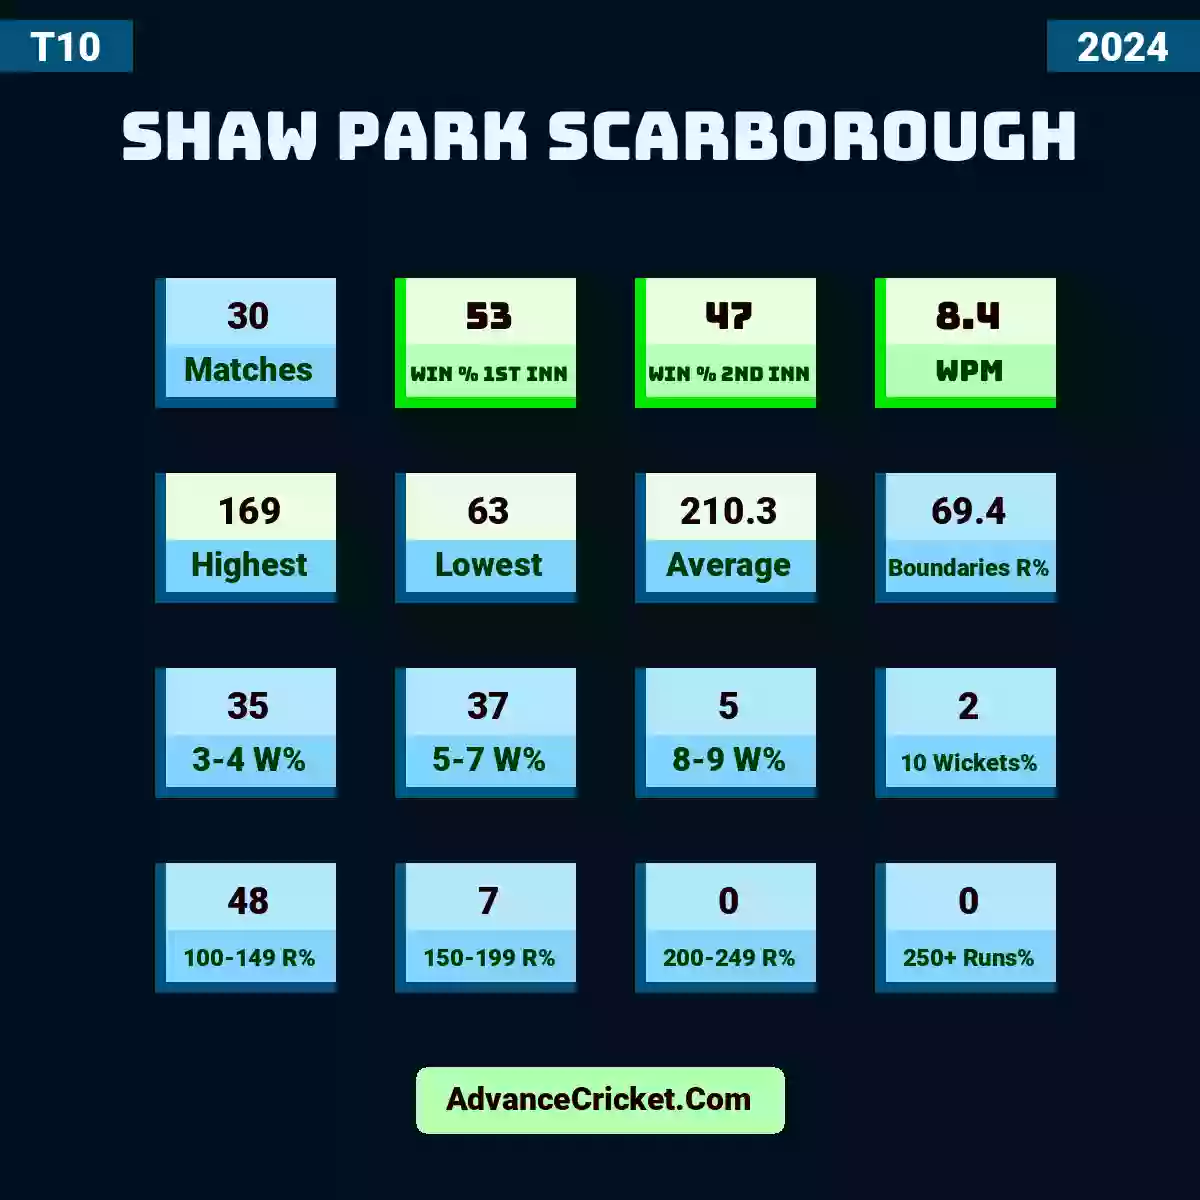 Image showing Shaw Park Scarborough T10 2024 with Matches: 30, Win % 1st Inn: 53, Win % 2nd Inn: 47, WPM: 8.4, Highest: 169, Lowest: 63, Average: 210.3, Boundaries R%: 69.4, 3-4 W%: 35, 5-7 W%: 37, 8-9 W%: 5, 10 Wickets%: 2, 100-149 R%: 48, 150-199 R%: 7, 200-249 R%: 0, 250+ Runs%: 0.